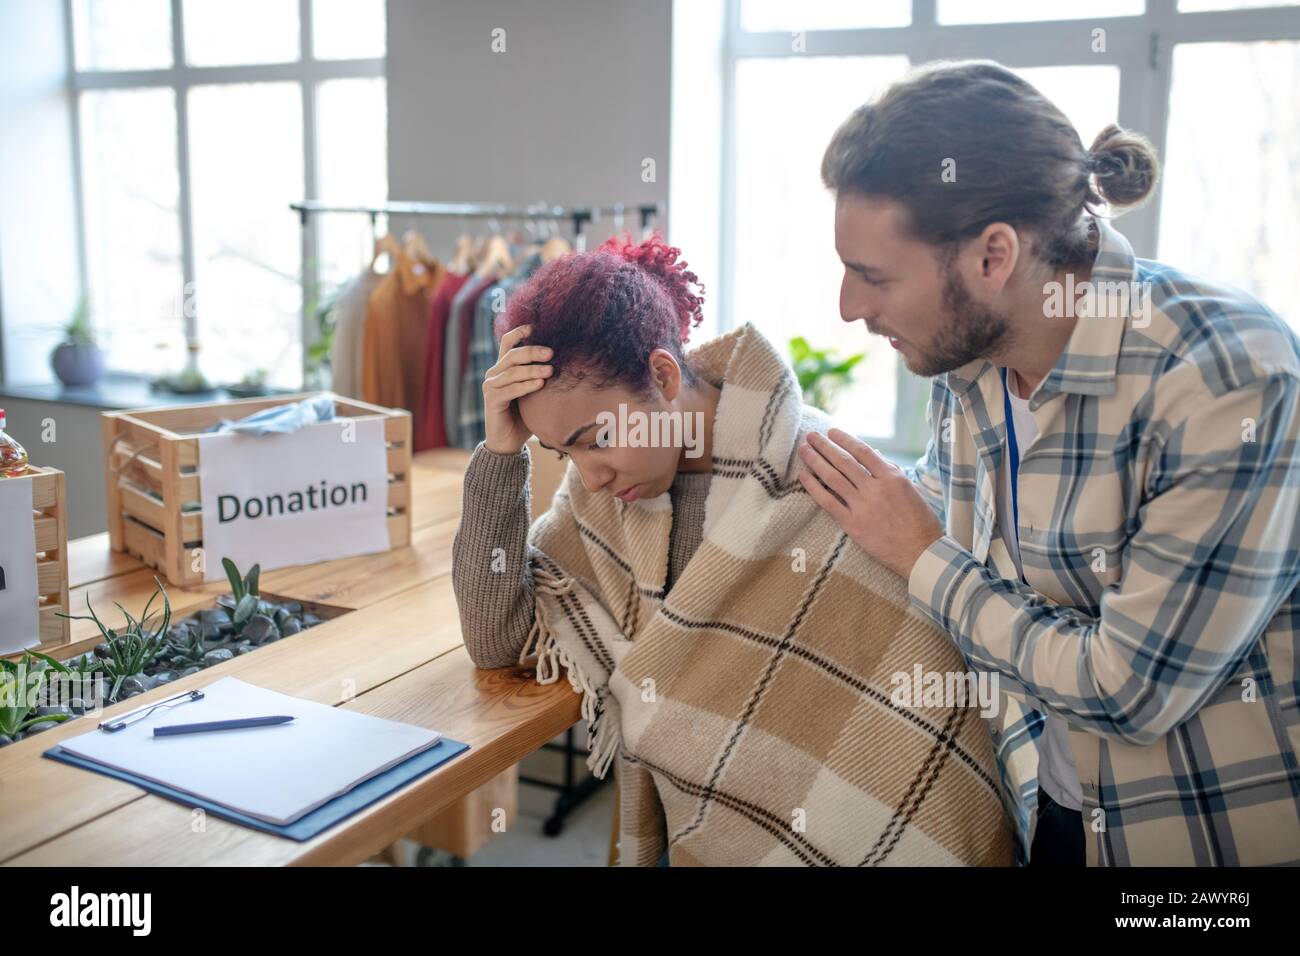 Young sad girl in plaid sitting tiredly at table, man hugging. Stock Photo